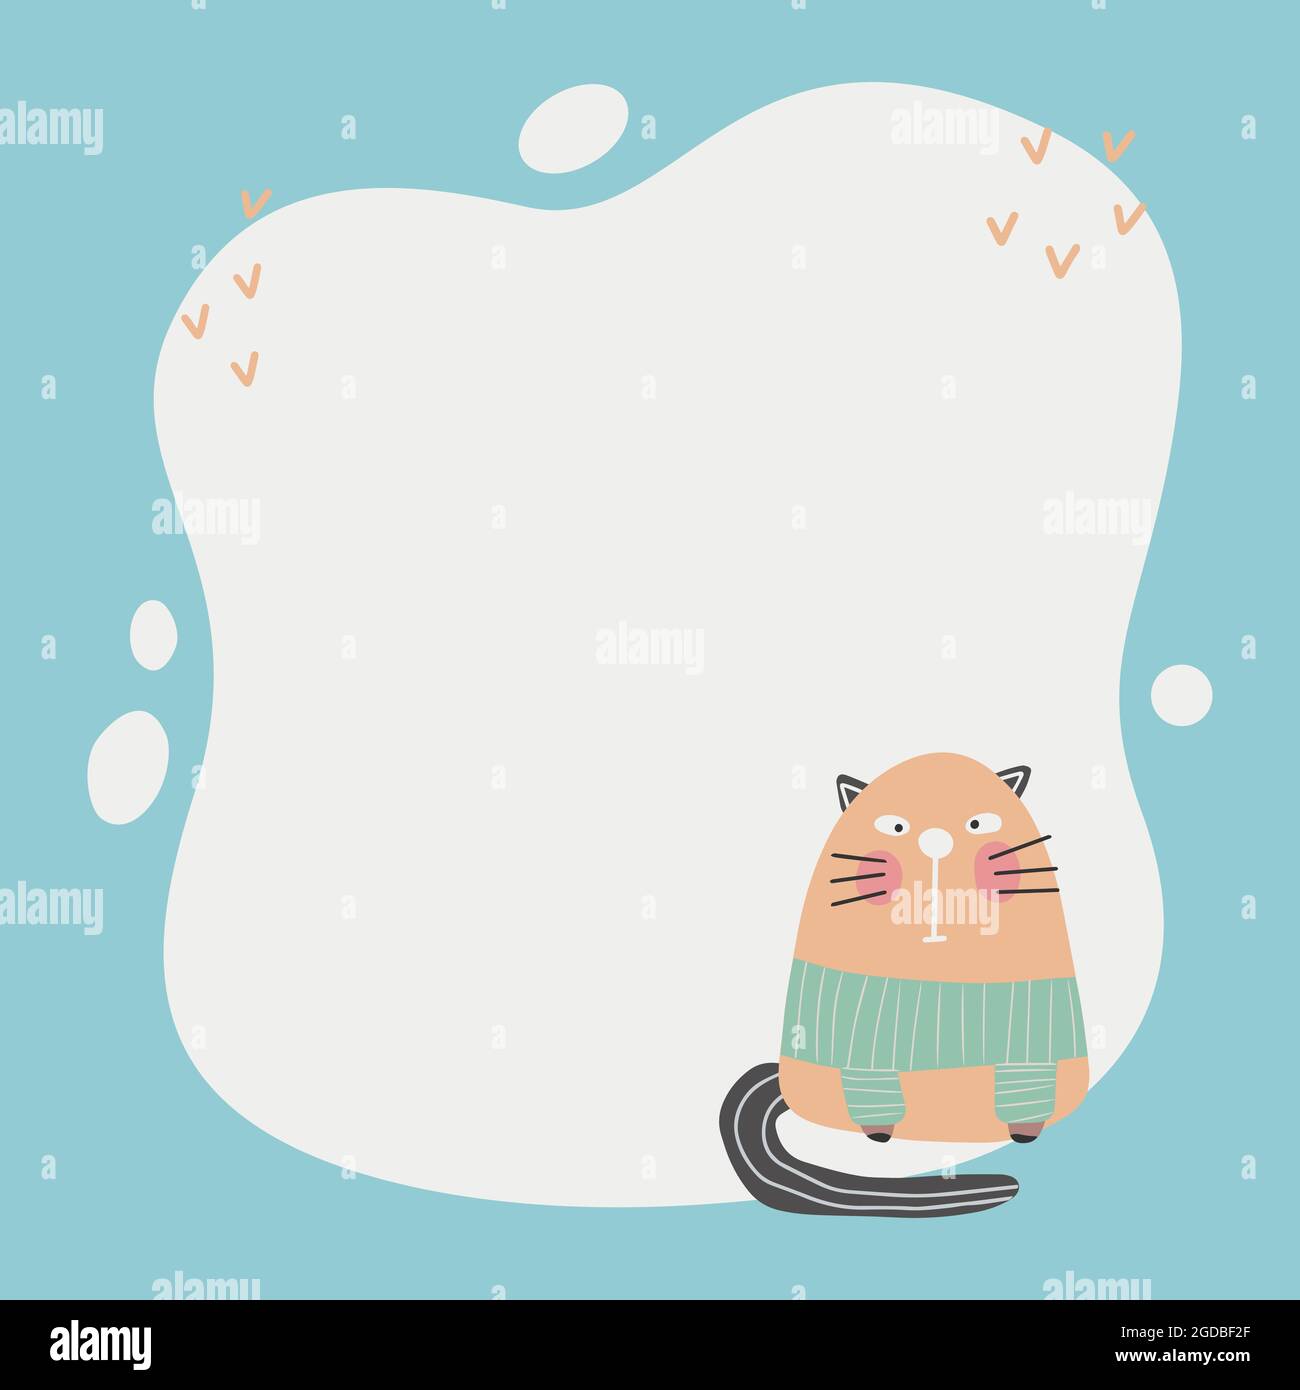 Cute cat with a blot frame in simple cartoon hand-drawn style. Template for your text or photo. Ideal for cards, invitations, party, kindergarten, pre Stock Vector